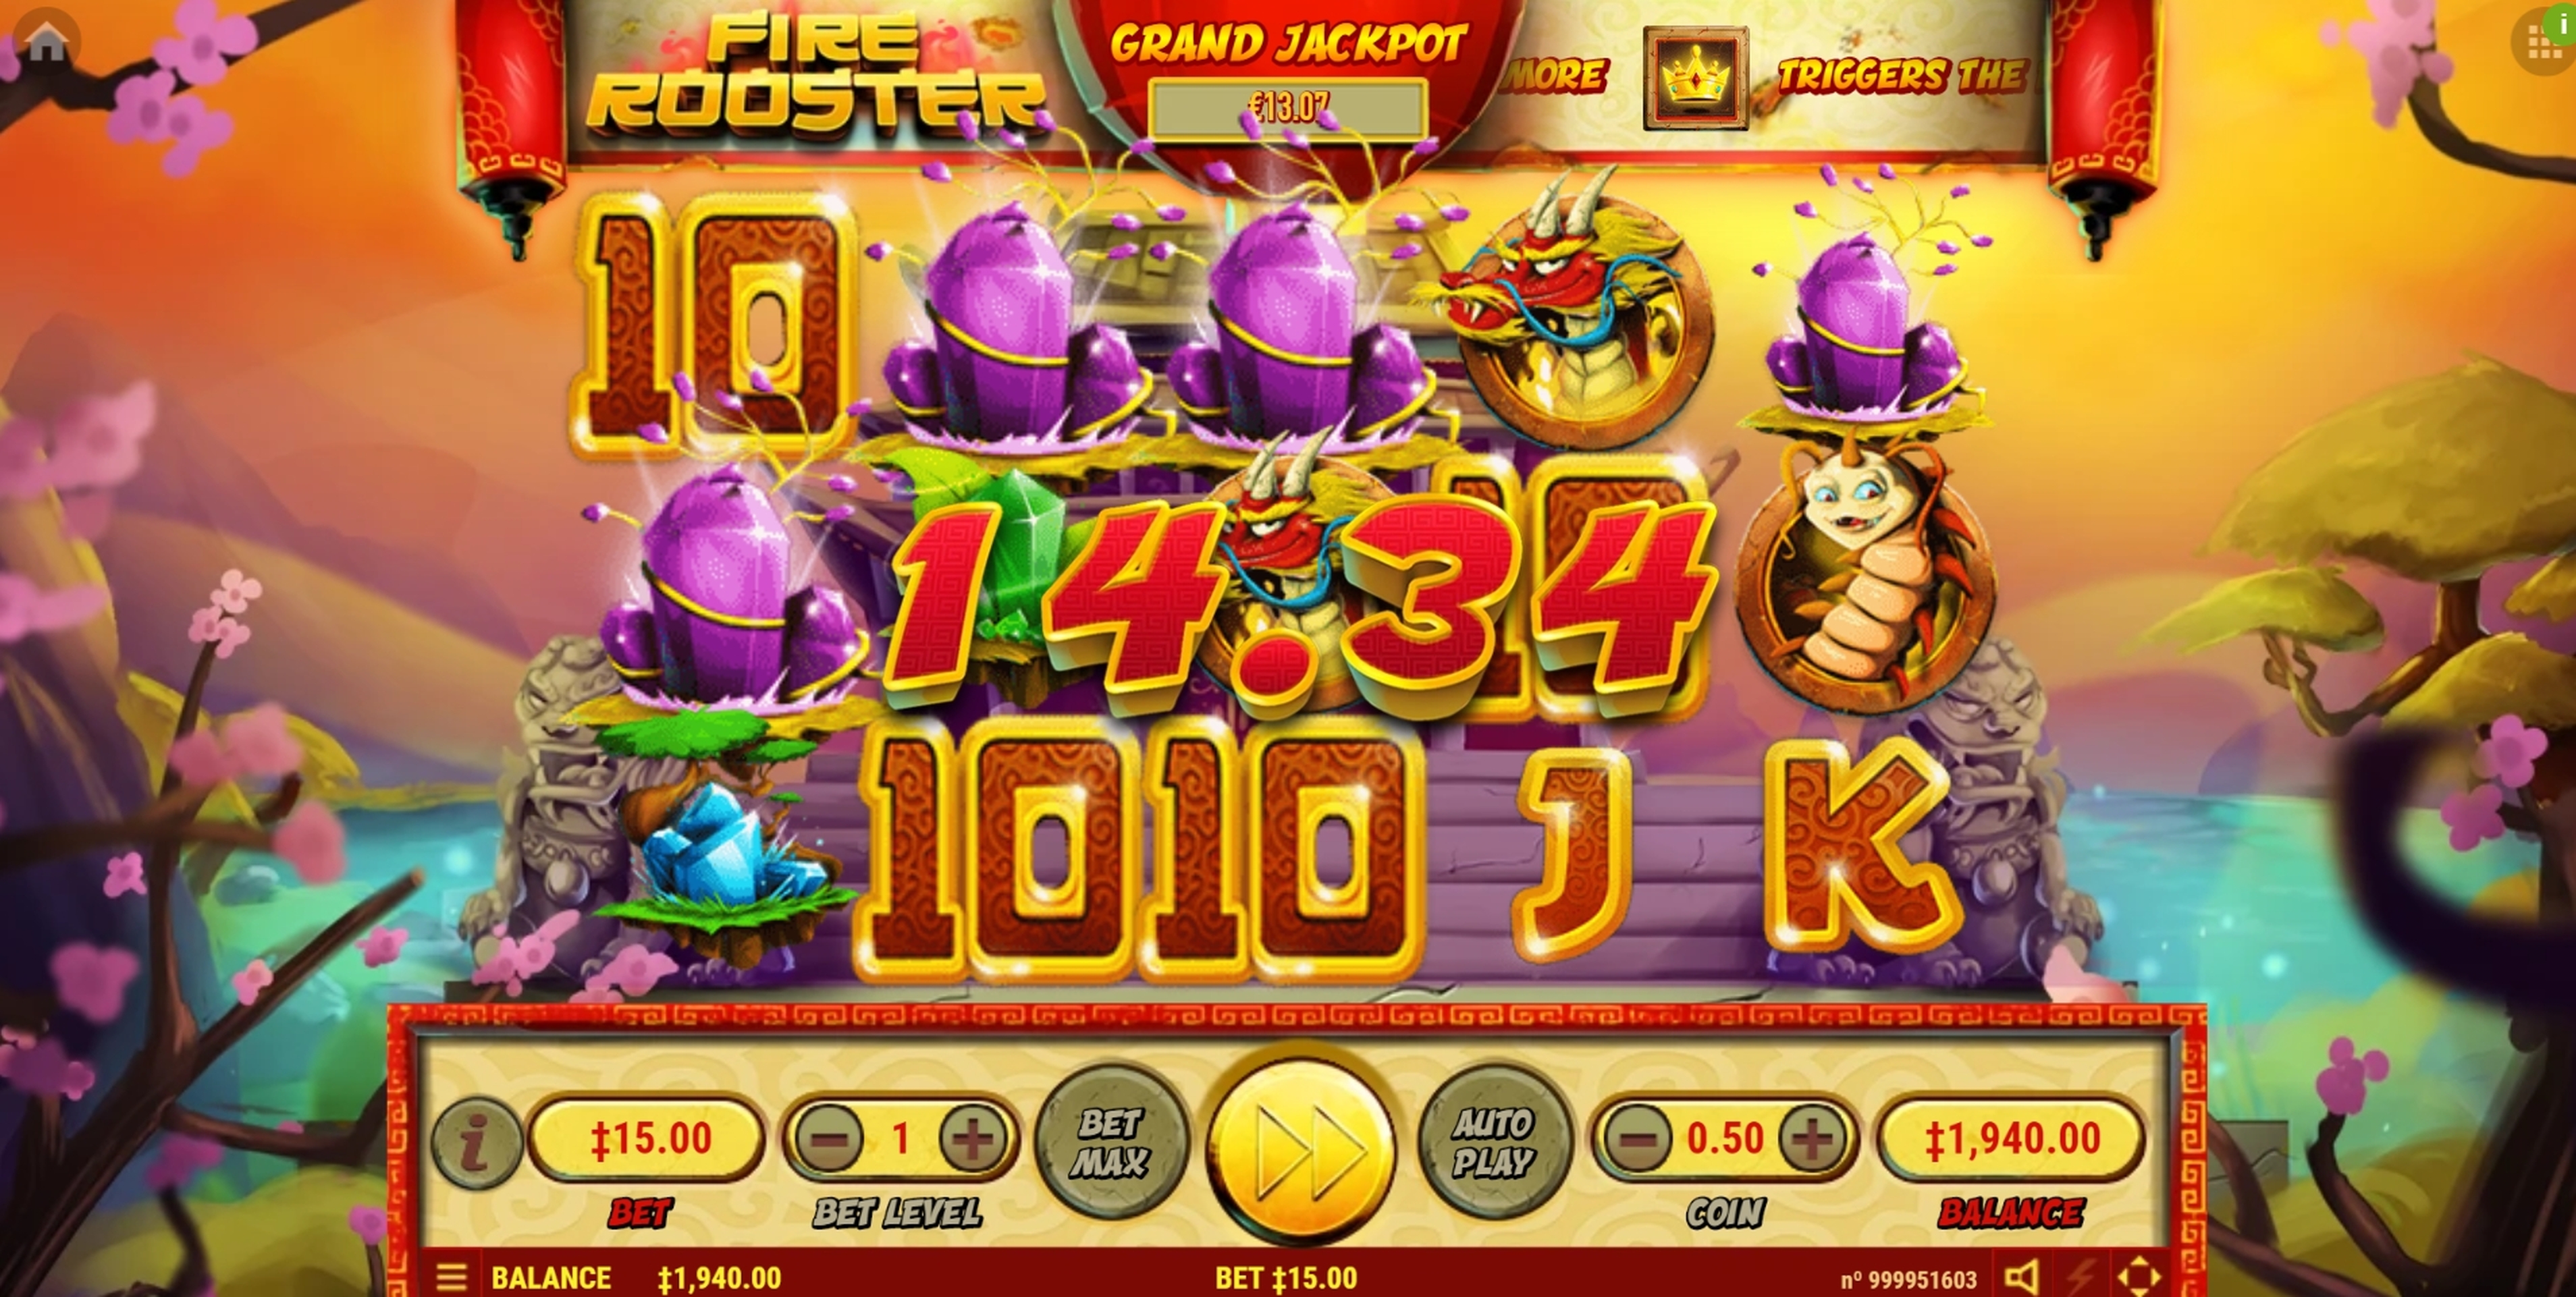 Win Money in Fire Rooster Free Slot Game by Habanero